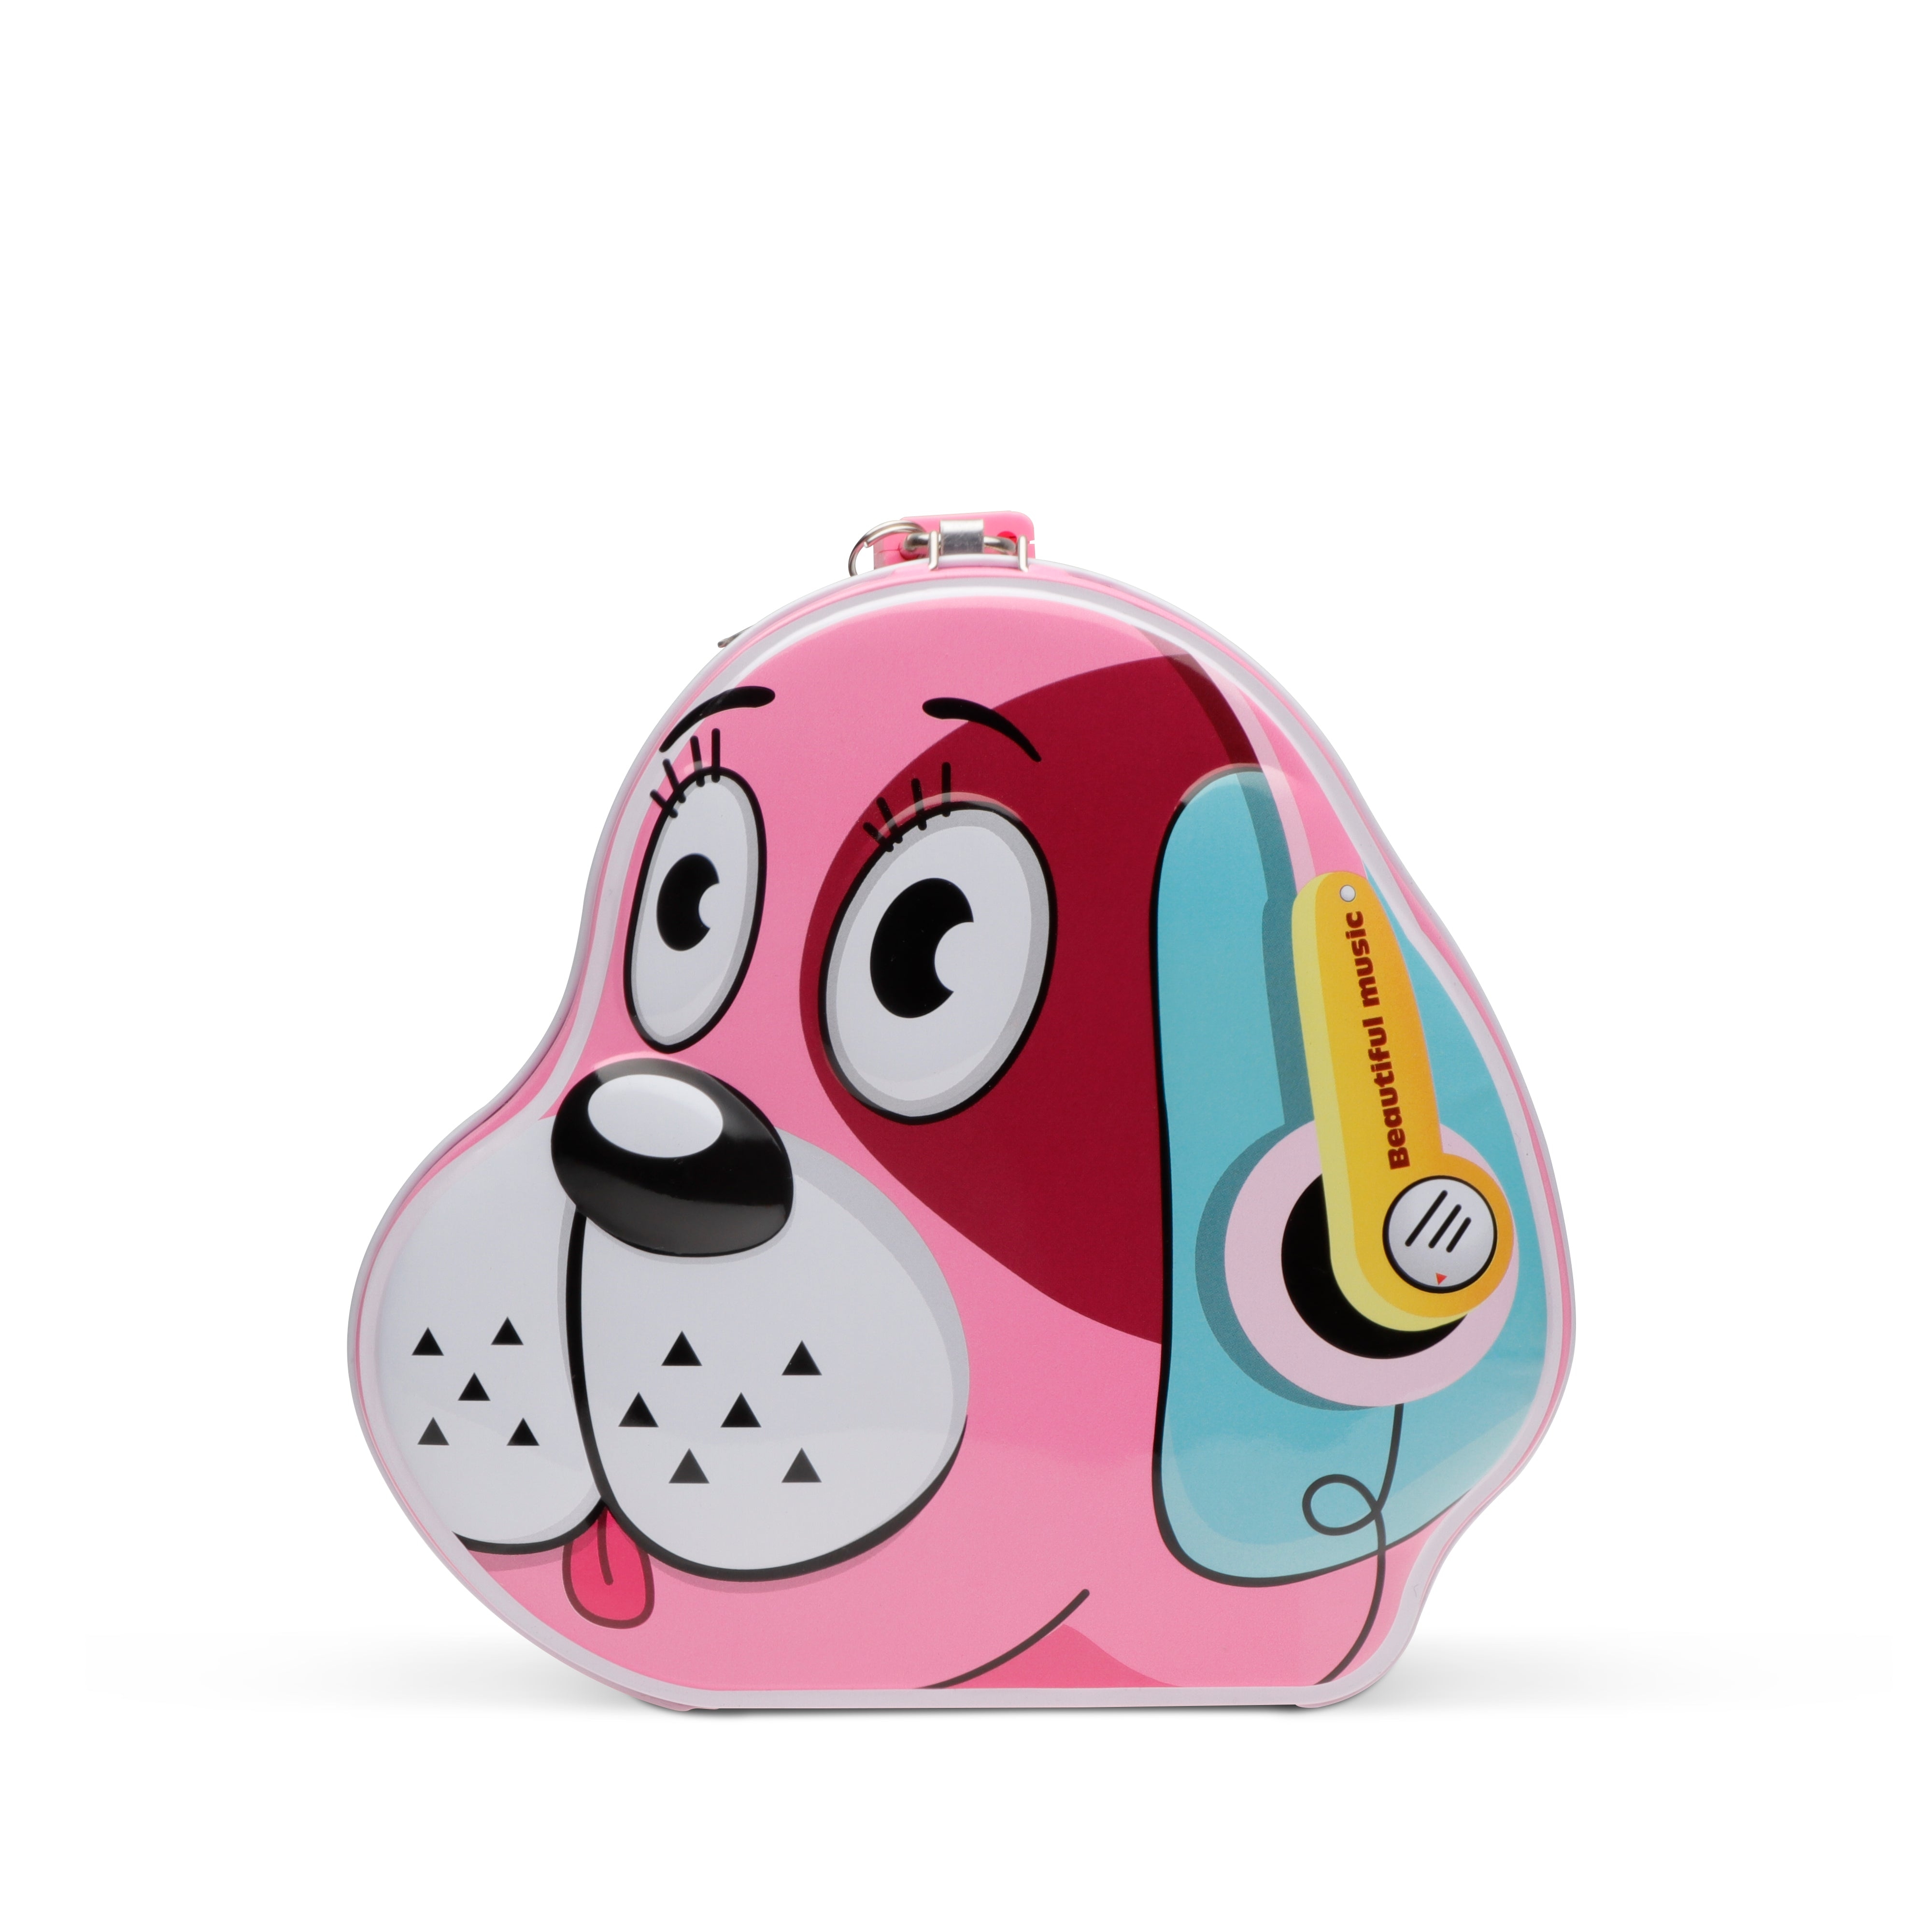 Archies Piggy Bank -Piggy Bank for Kids, Puppy Shaped Coin Box, Piggybank, Coin Bank, Money Bank, Piggy Bank for Kids Boys and Girls, Money Bank for Kids with Lock-Pink